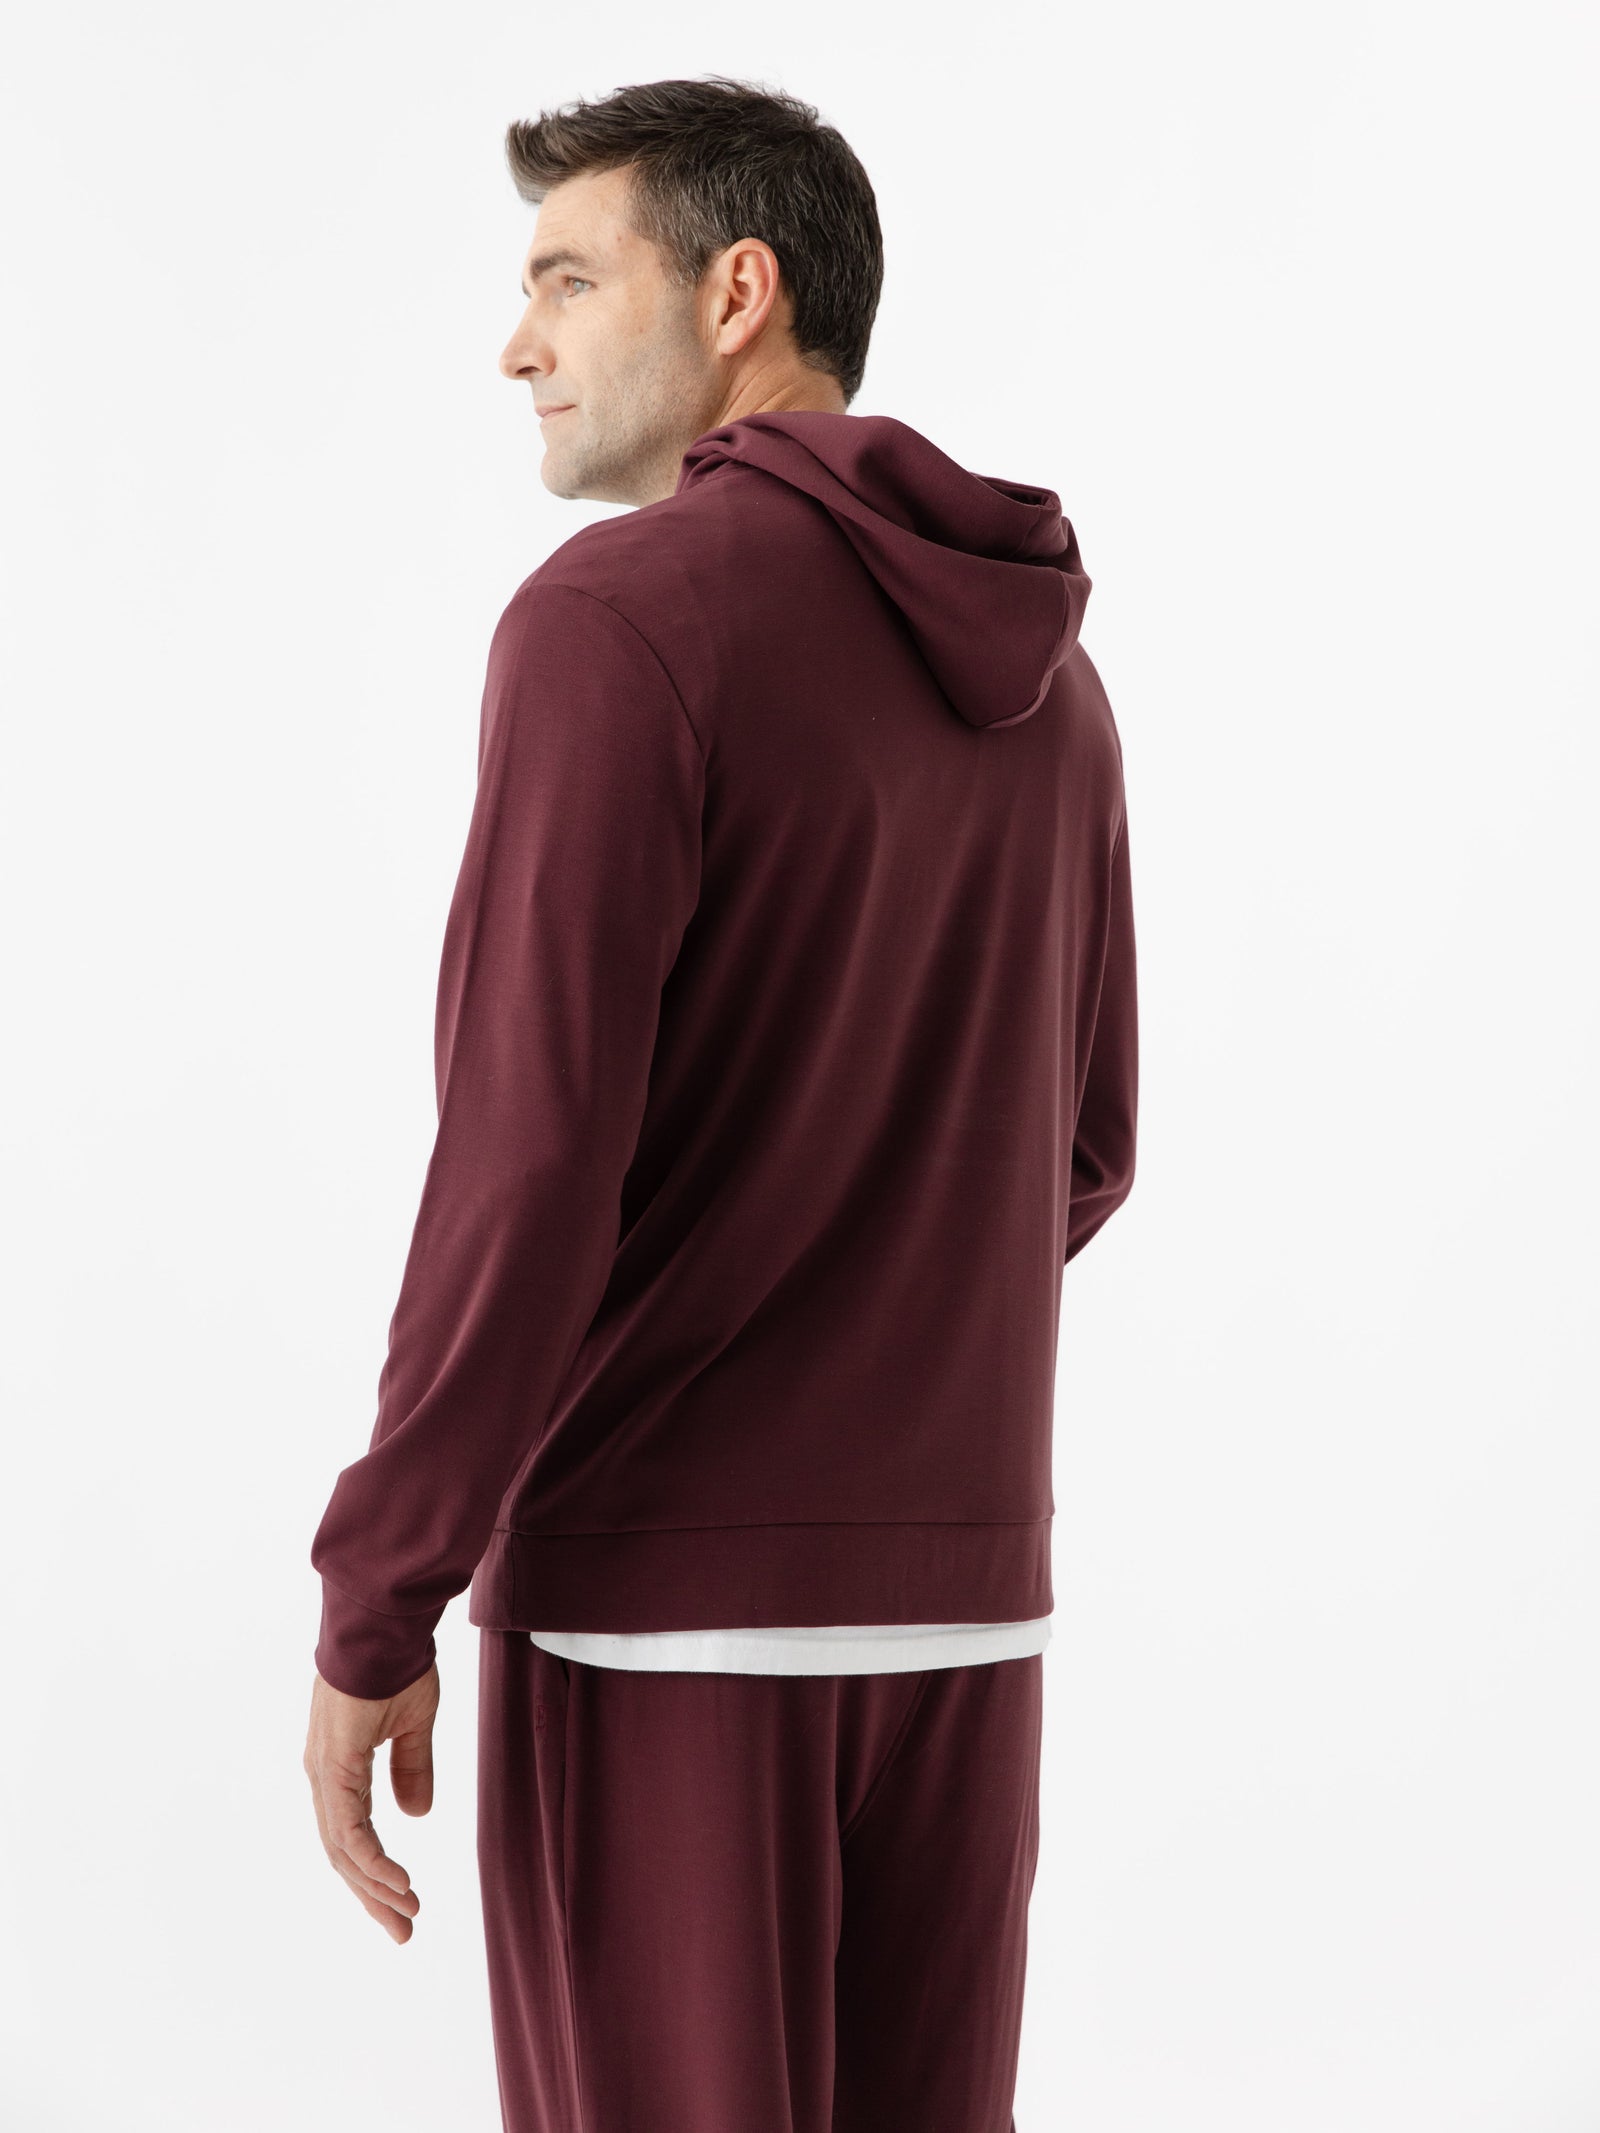 Burgundy Bamboo Hoodie worn by man standing in front of white background with his back facing the camera.